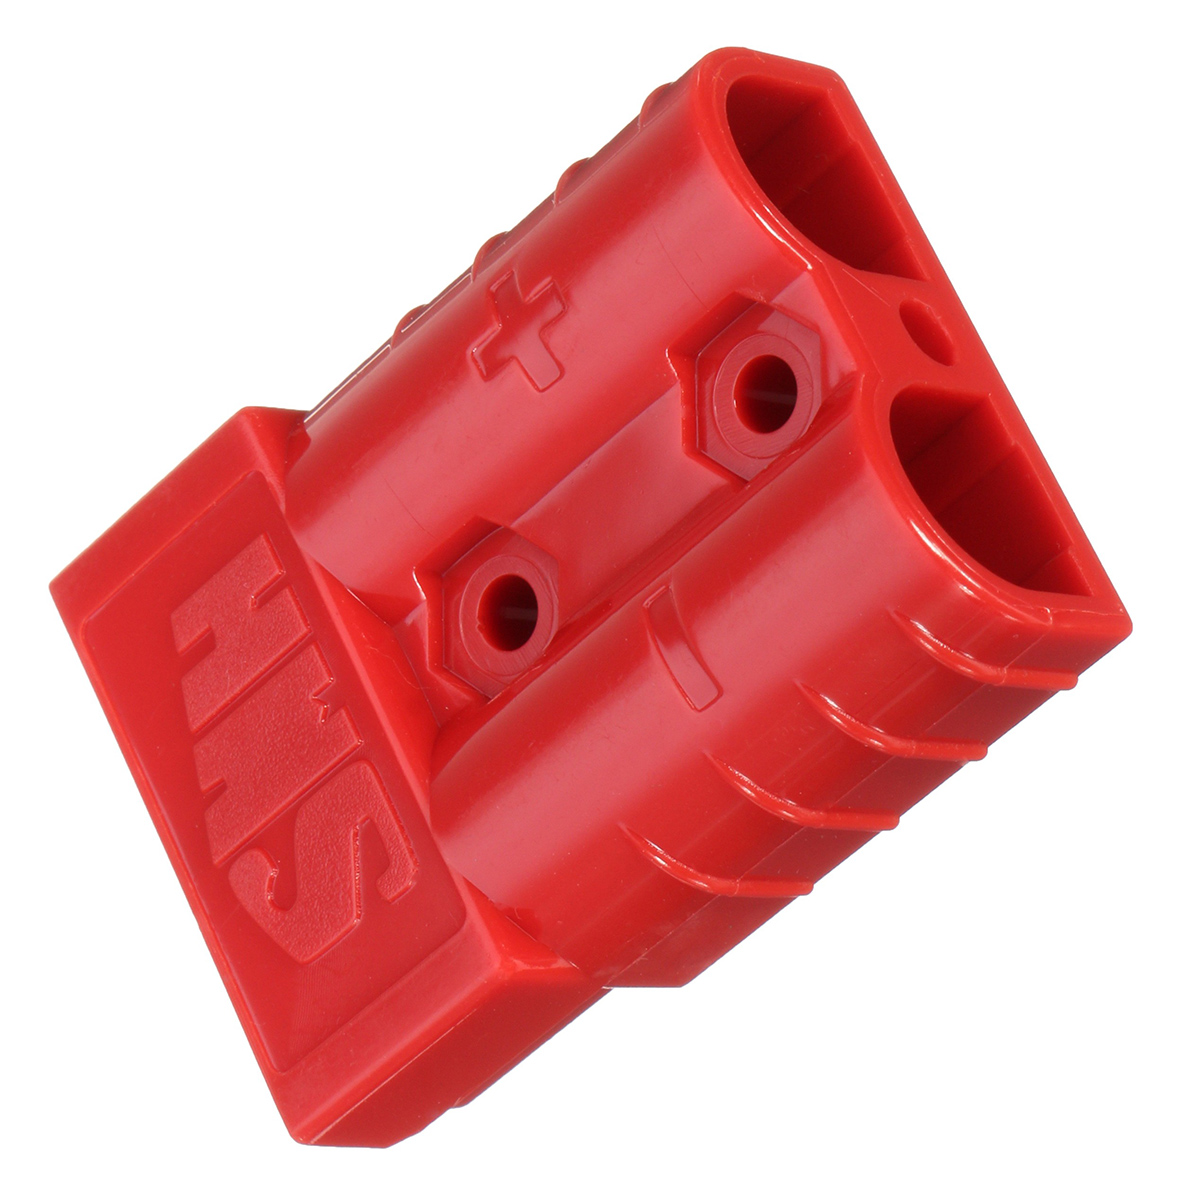 Excellway-50A-8AWG-Battery-Quick-Connector-Plug-Connect-Terminal-Disconnect-Winch-Trailer-Red-1170740-7